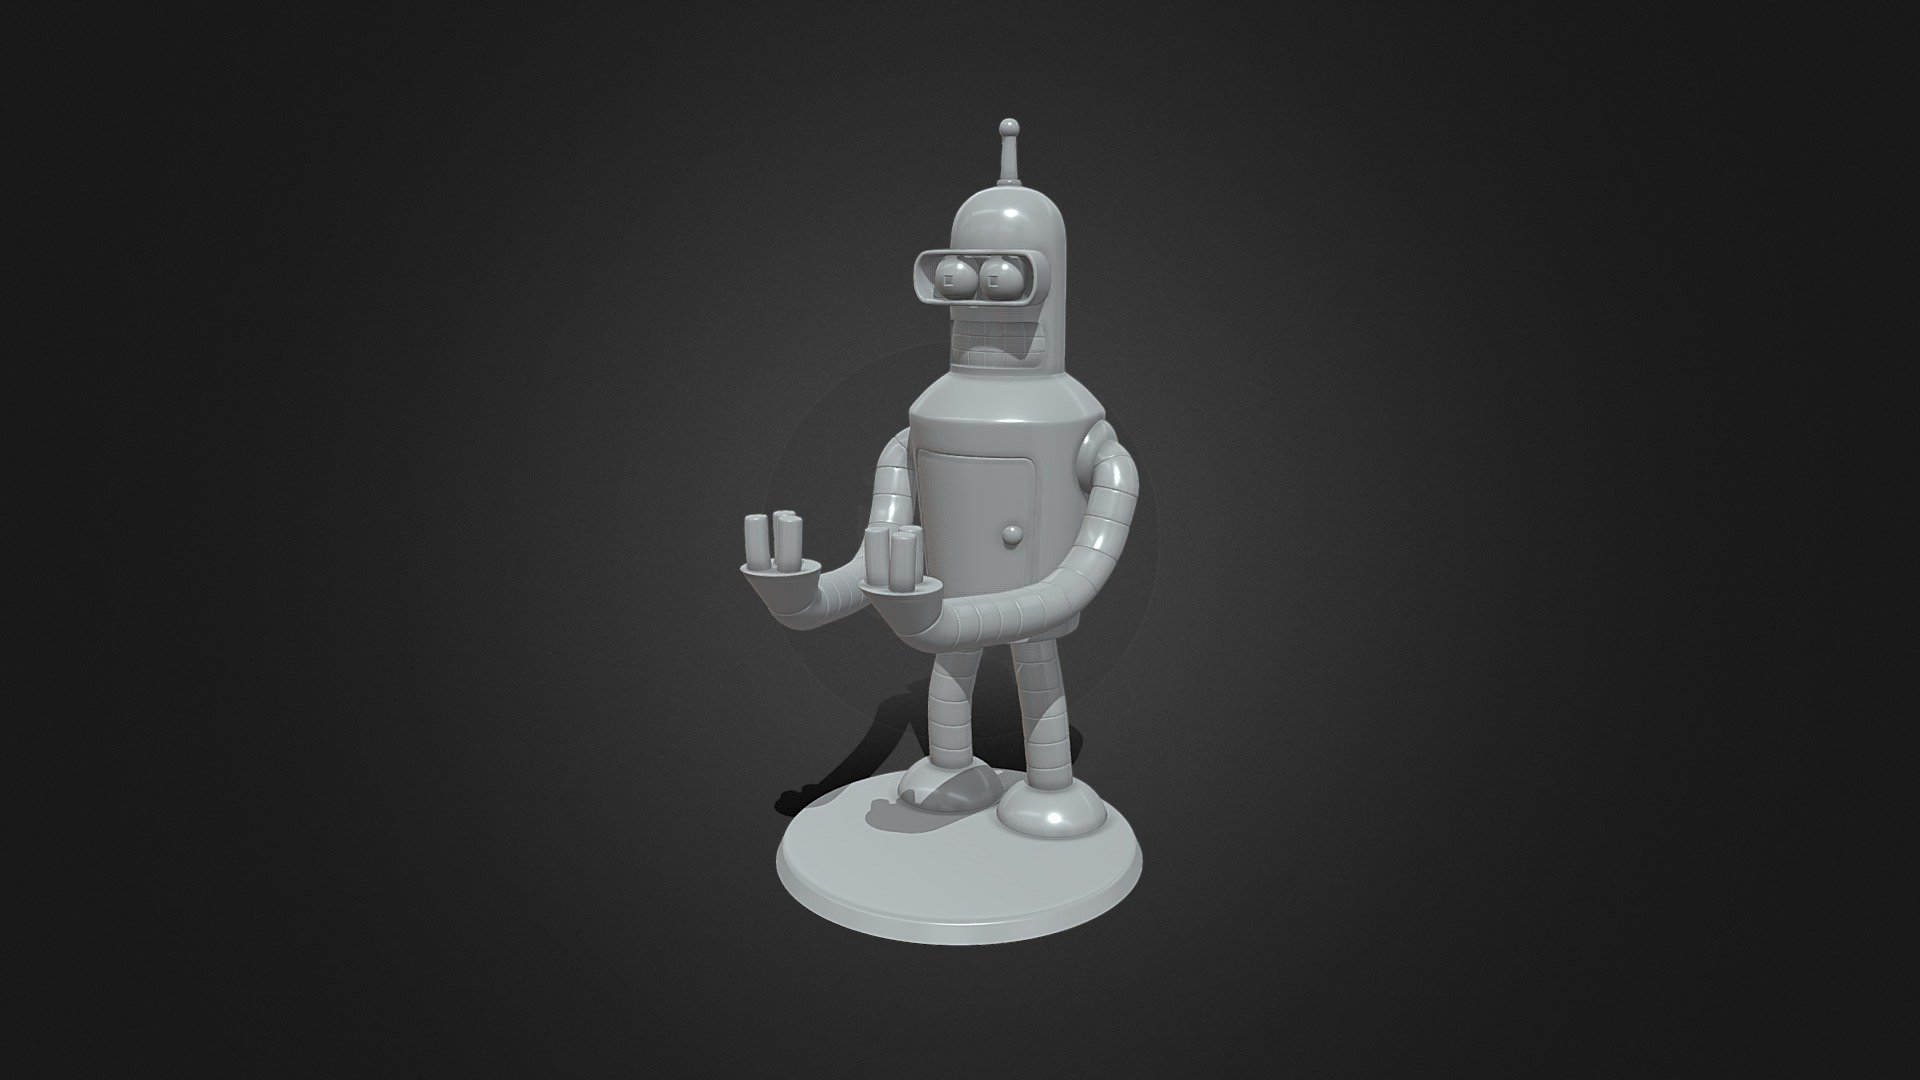 Model ready for FDM and SLA:
Step into the futuristic world of Futurama with this Bender-inspired headphone and controller stand. Crafted with meticulous detail, this 3D-printable model captures Bender's iconic personality and design, providing a stylish and functional solution for storing your headphones and controller. Whether displayed on your desk or gaming setup, this stand adds a touch of sci-fi charm to any space. Made with durable materials and precise dimensions, it's a must-have accessory for fans of Futurama and gaming enthusiasts alike.

To purchase this printed model visit our store at https://shorturl.at/zIR13 - Futurama Bender Headphone and Controller Stand - Buy Royalty Free 3D model by TheEmerald 3d model